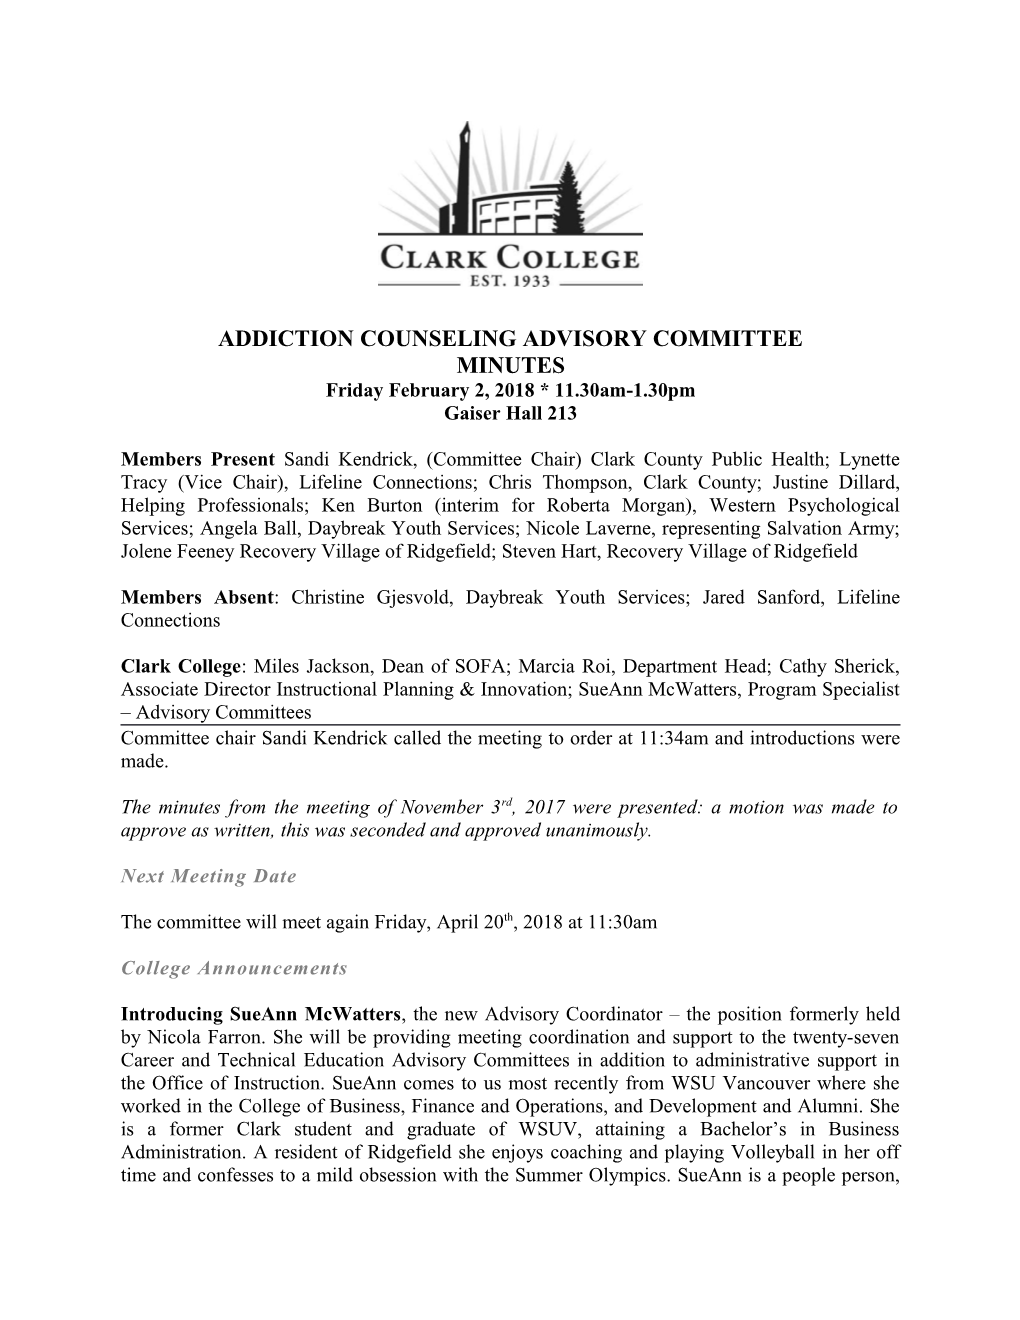 Addiction Counseling Advisory Committee